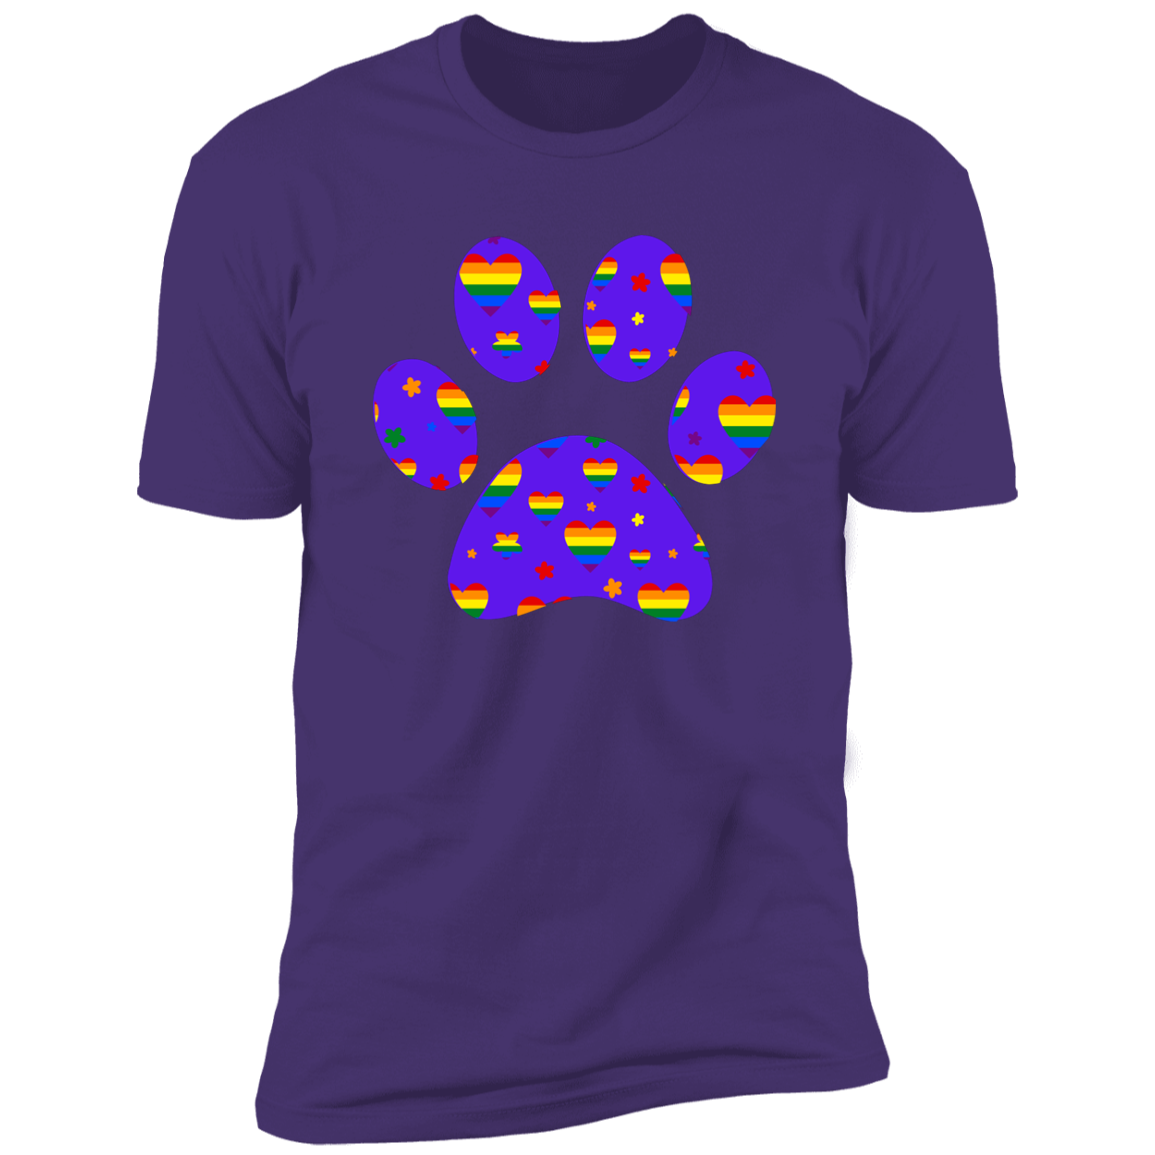 Pride Paw 2023 (Hearts) Pride T-shirt, Paw Pride Dog Shirt for humans, in purple rush